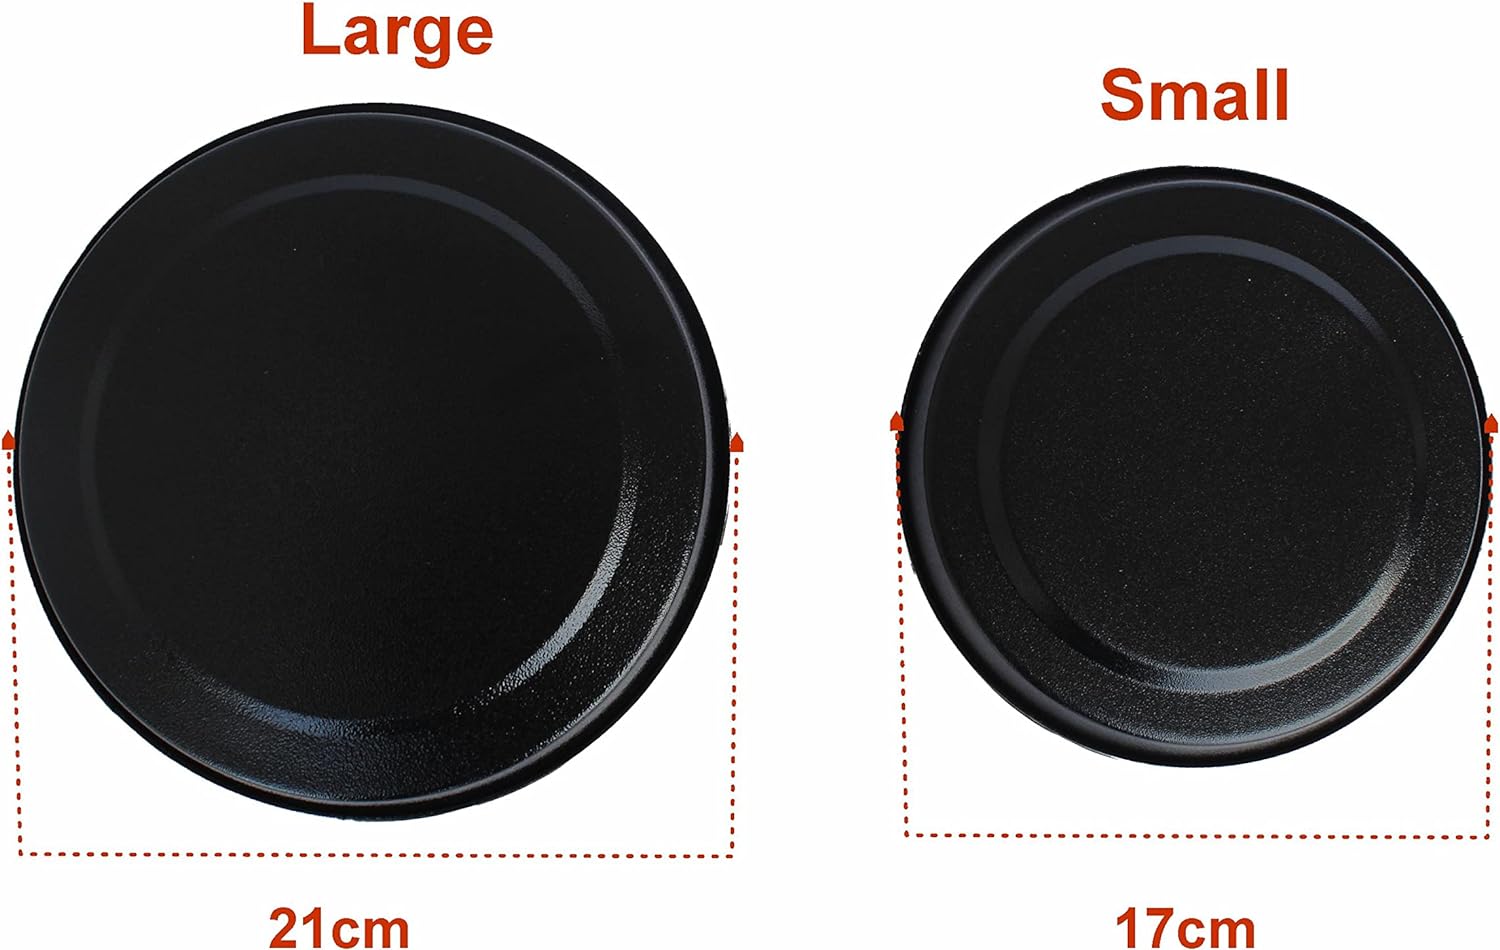 SUL 4 Pcs Hob Cover Set Stove Plate Cooker Top Burner Protector Silver Kit Home Kitchen Tools & Accessories Restaurants CANTEENS Safety Worktop Savers (Black) - Amazing Gadgets Outlet